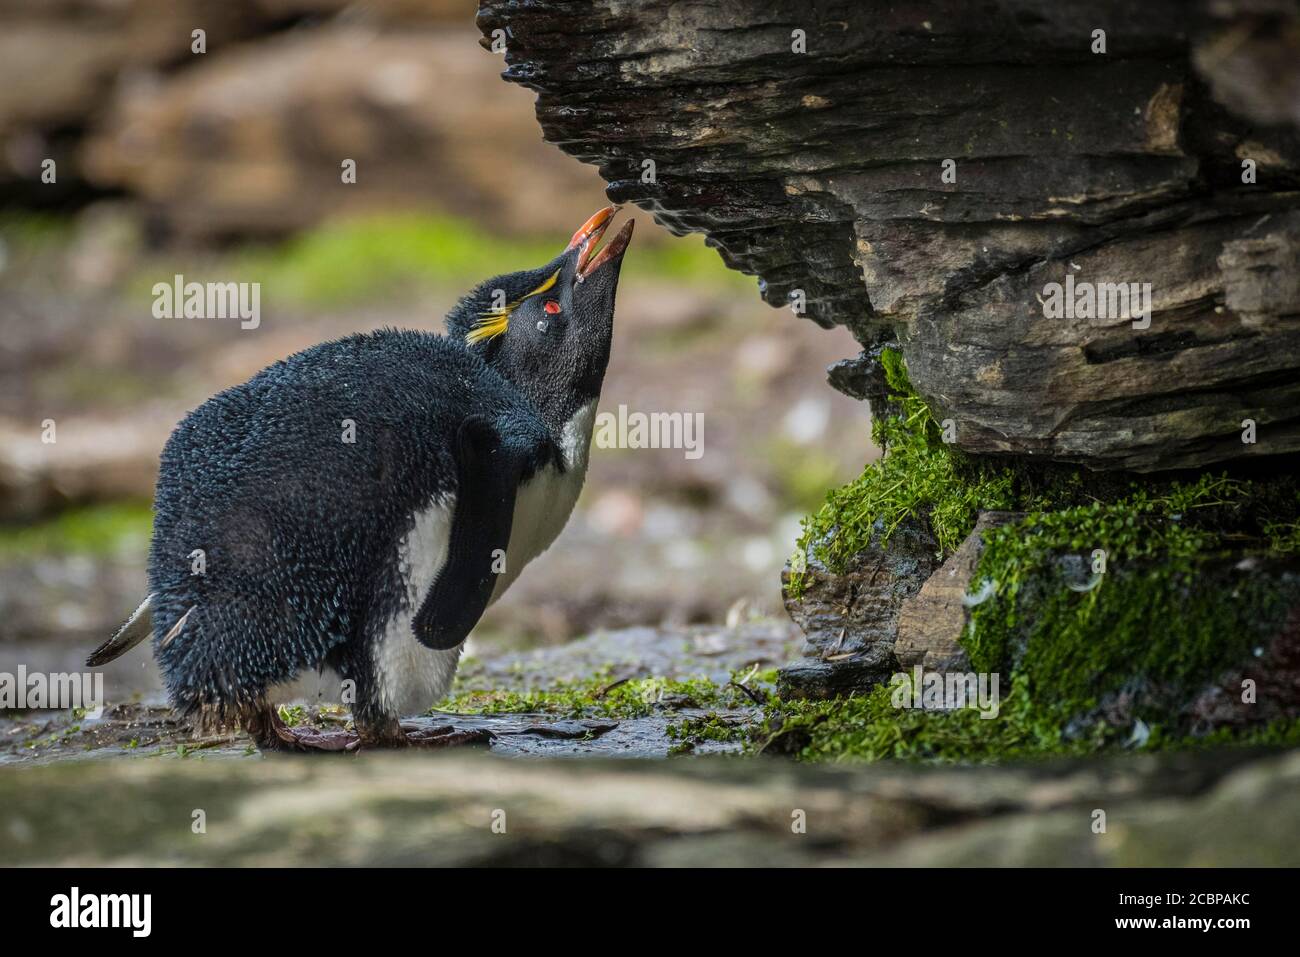 Rockhopper Penguin (Eudyptes chrysocome) drinks at a fresh water spot, Saunders Island, Falkland Islands, Great Britain, South America Stock Photo